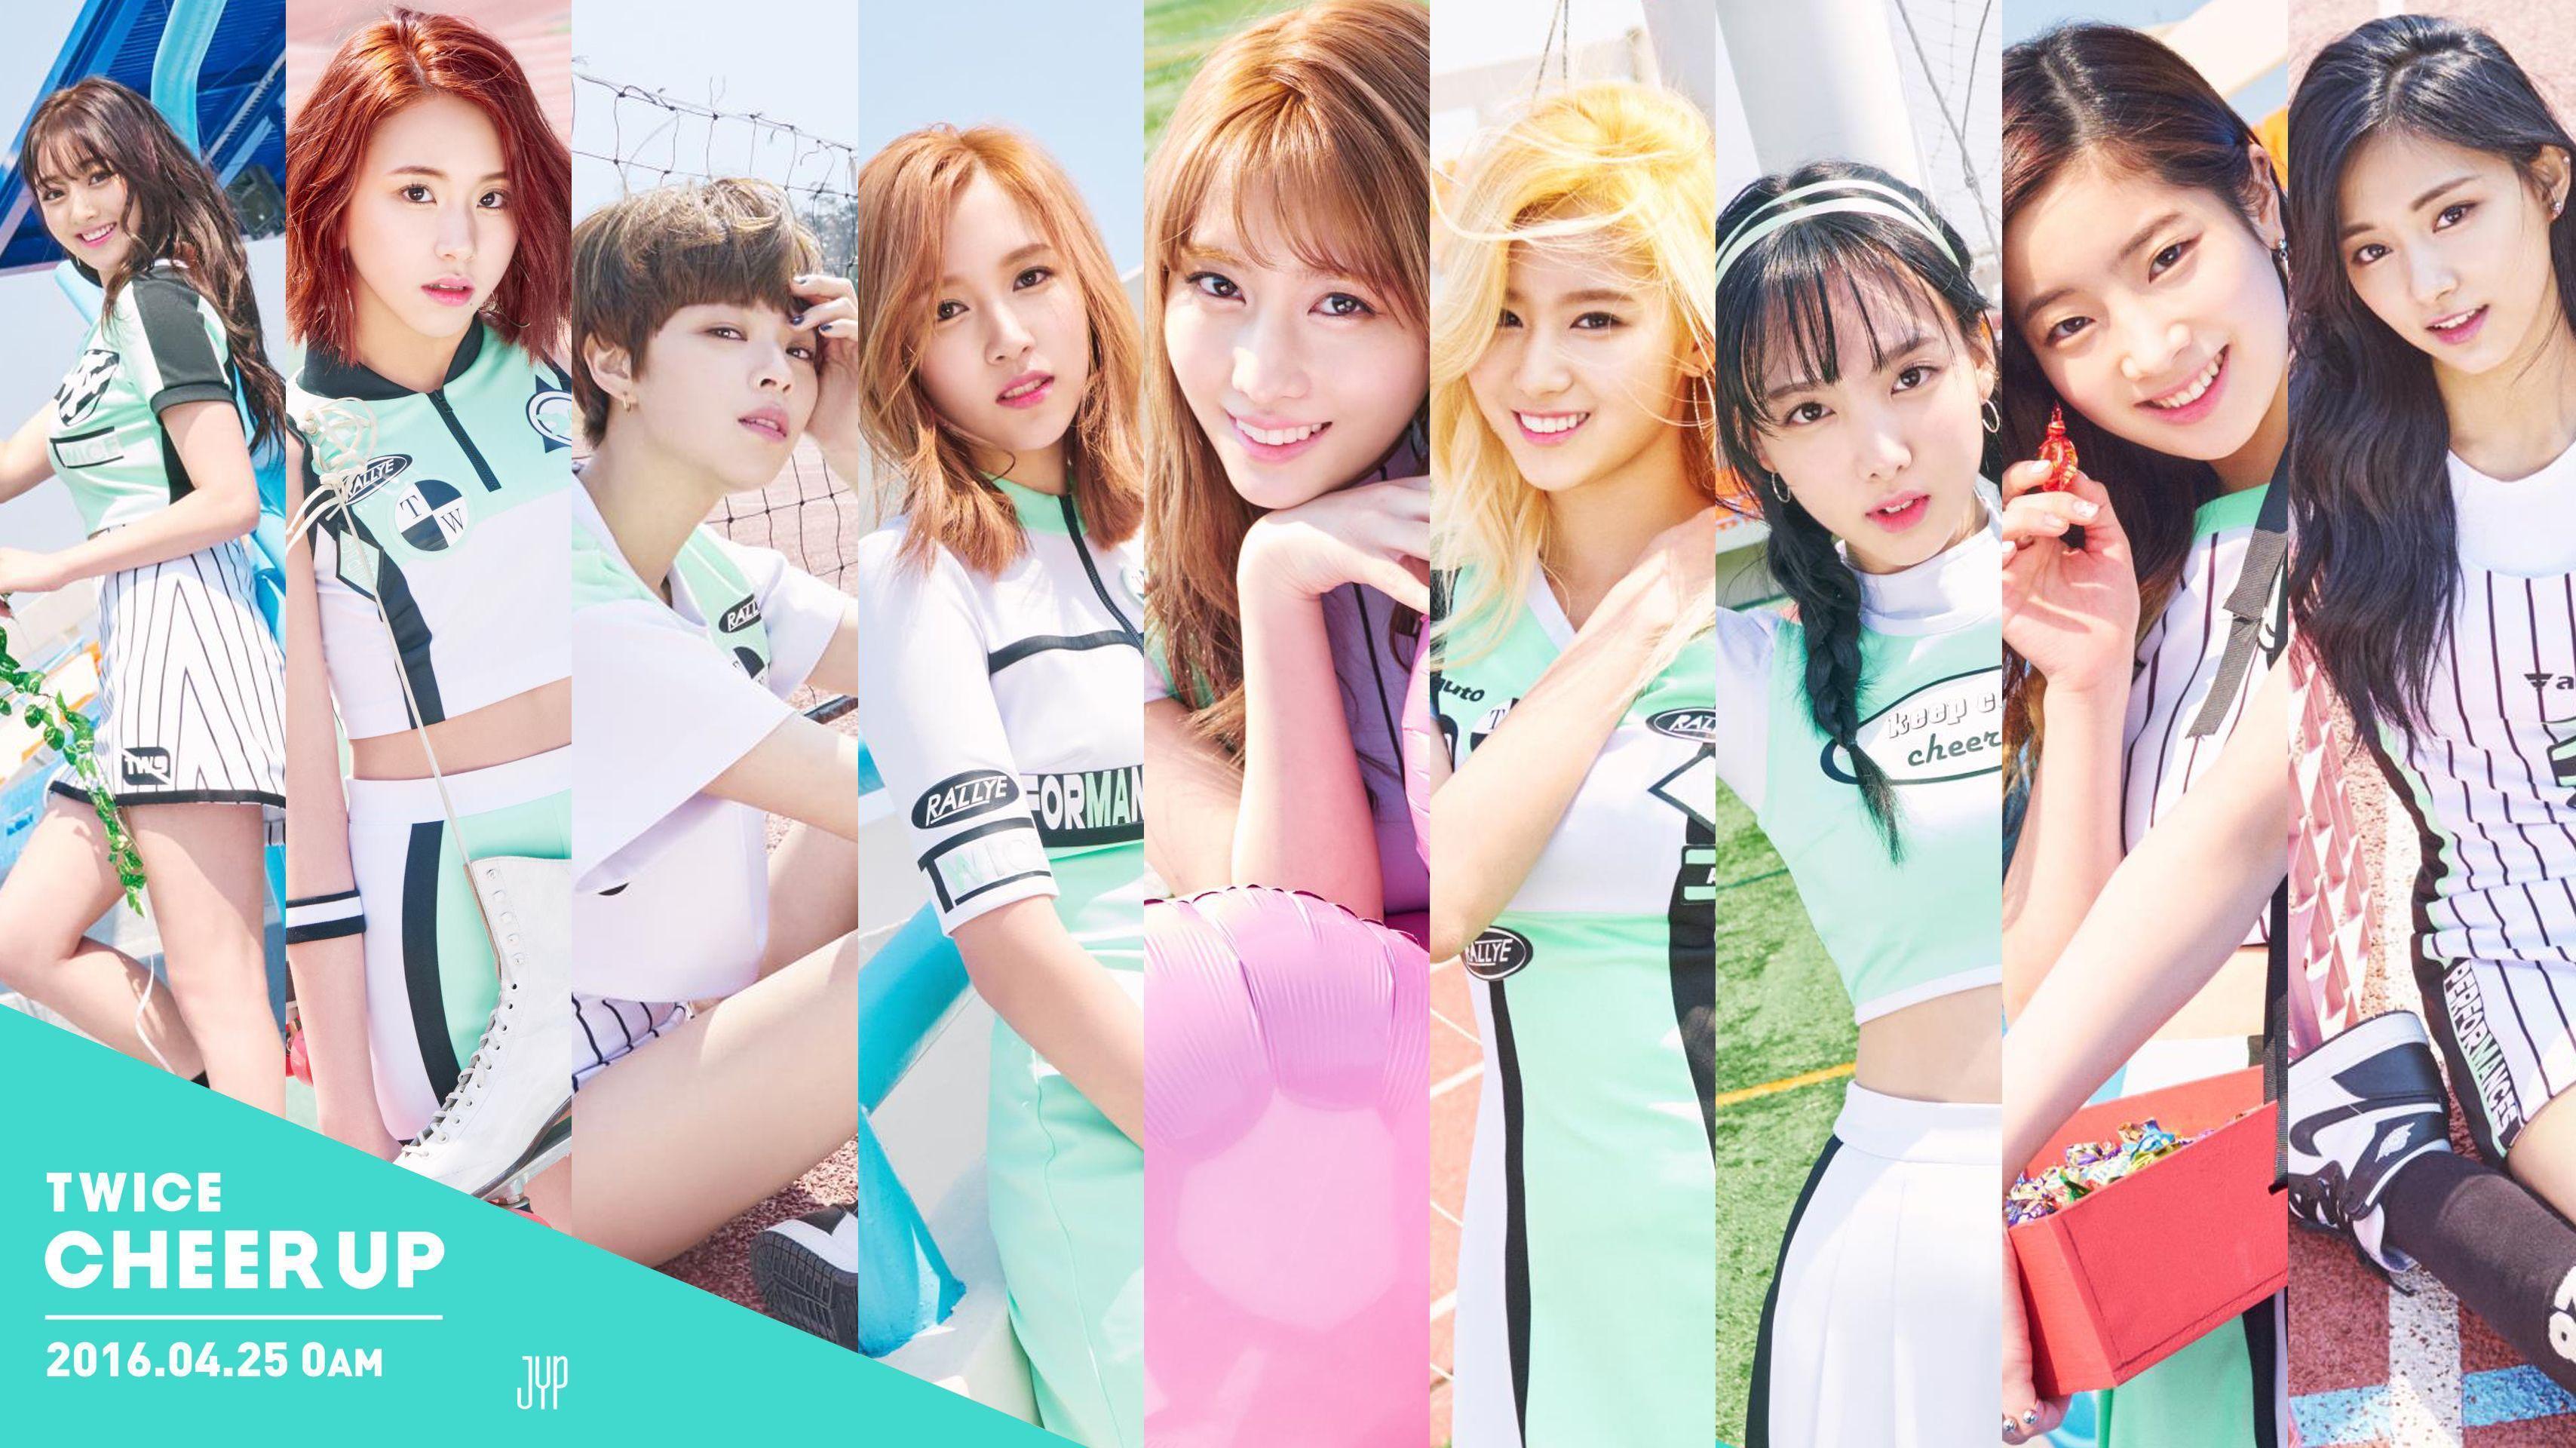  TWICE  Wallpaper  HD For Desktop  and Phone Visual Arts Ideas